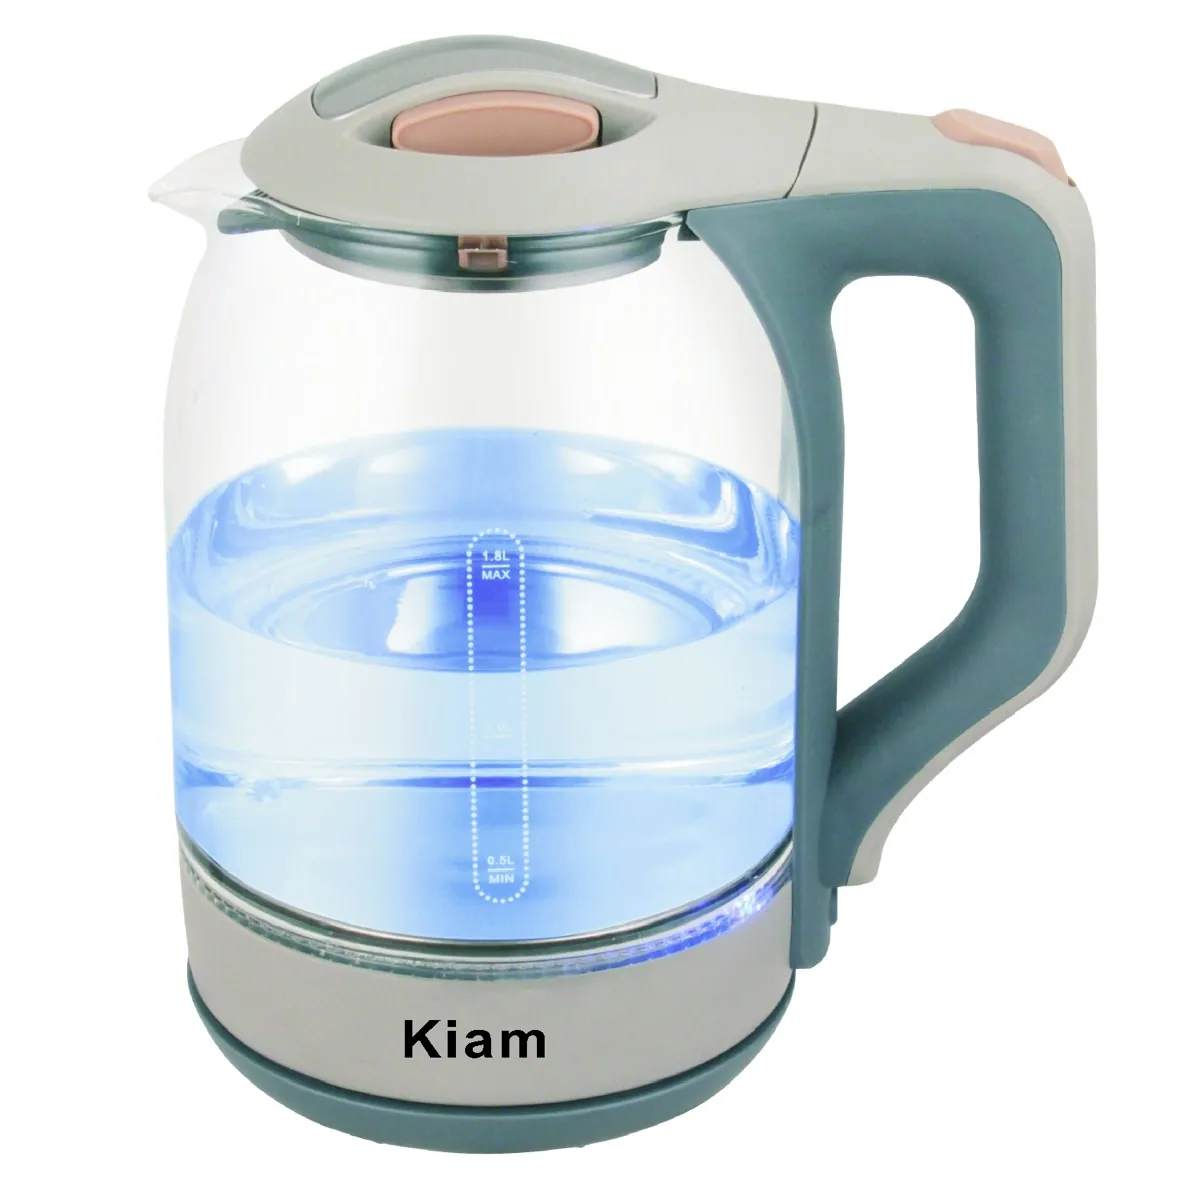 Kiam Electric Kettle BL002 Automatically Turns Off – Automatic Over Heat Protection (1.8 L)